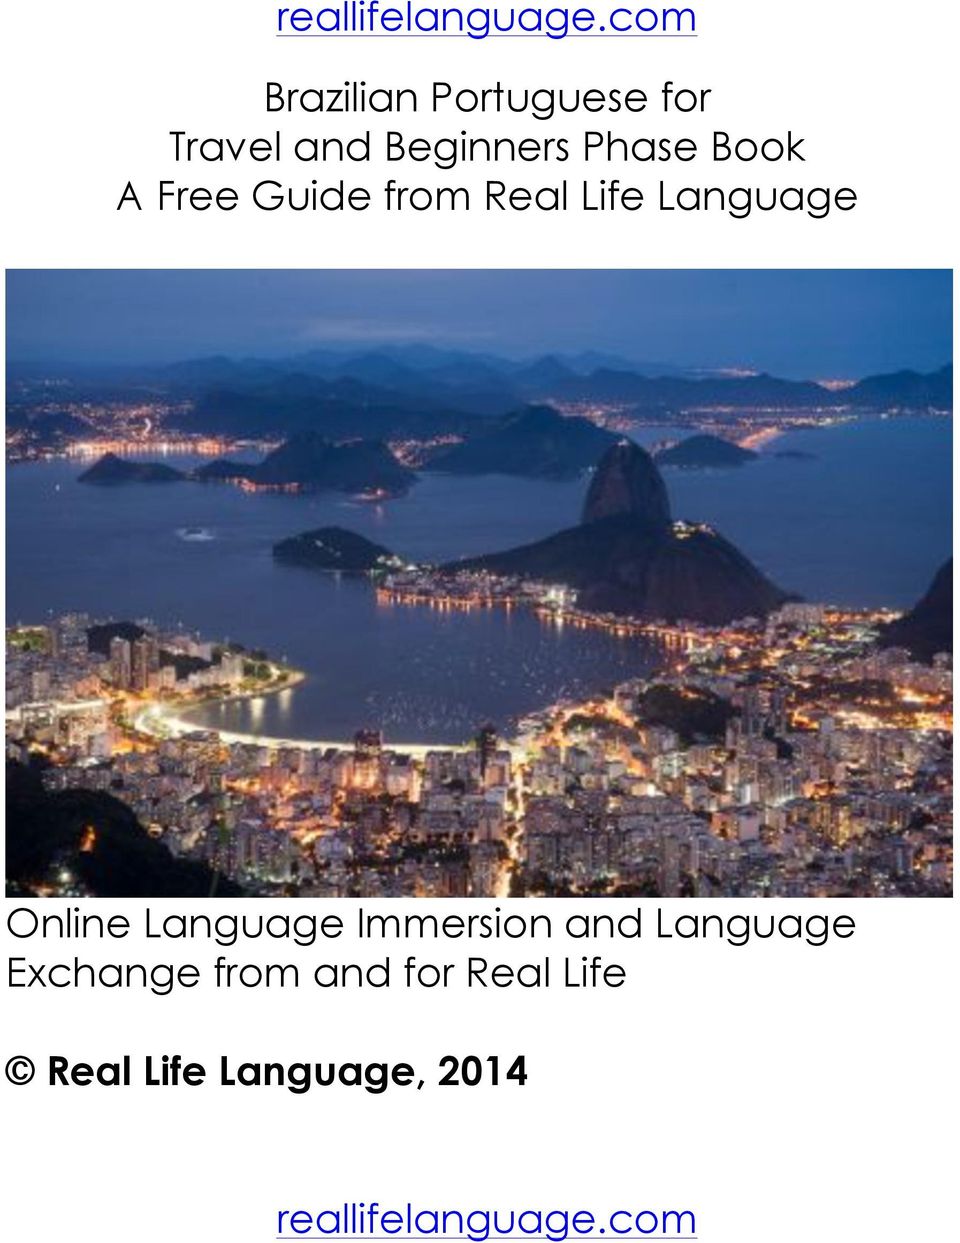 Language Immersion and Language Exchange from and